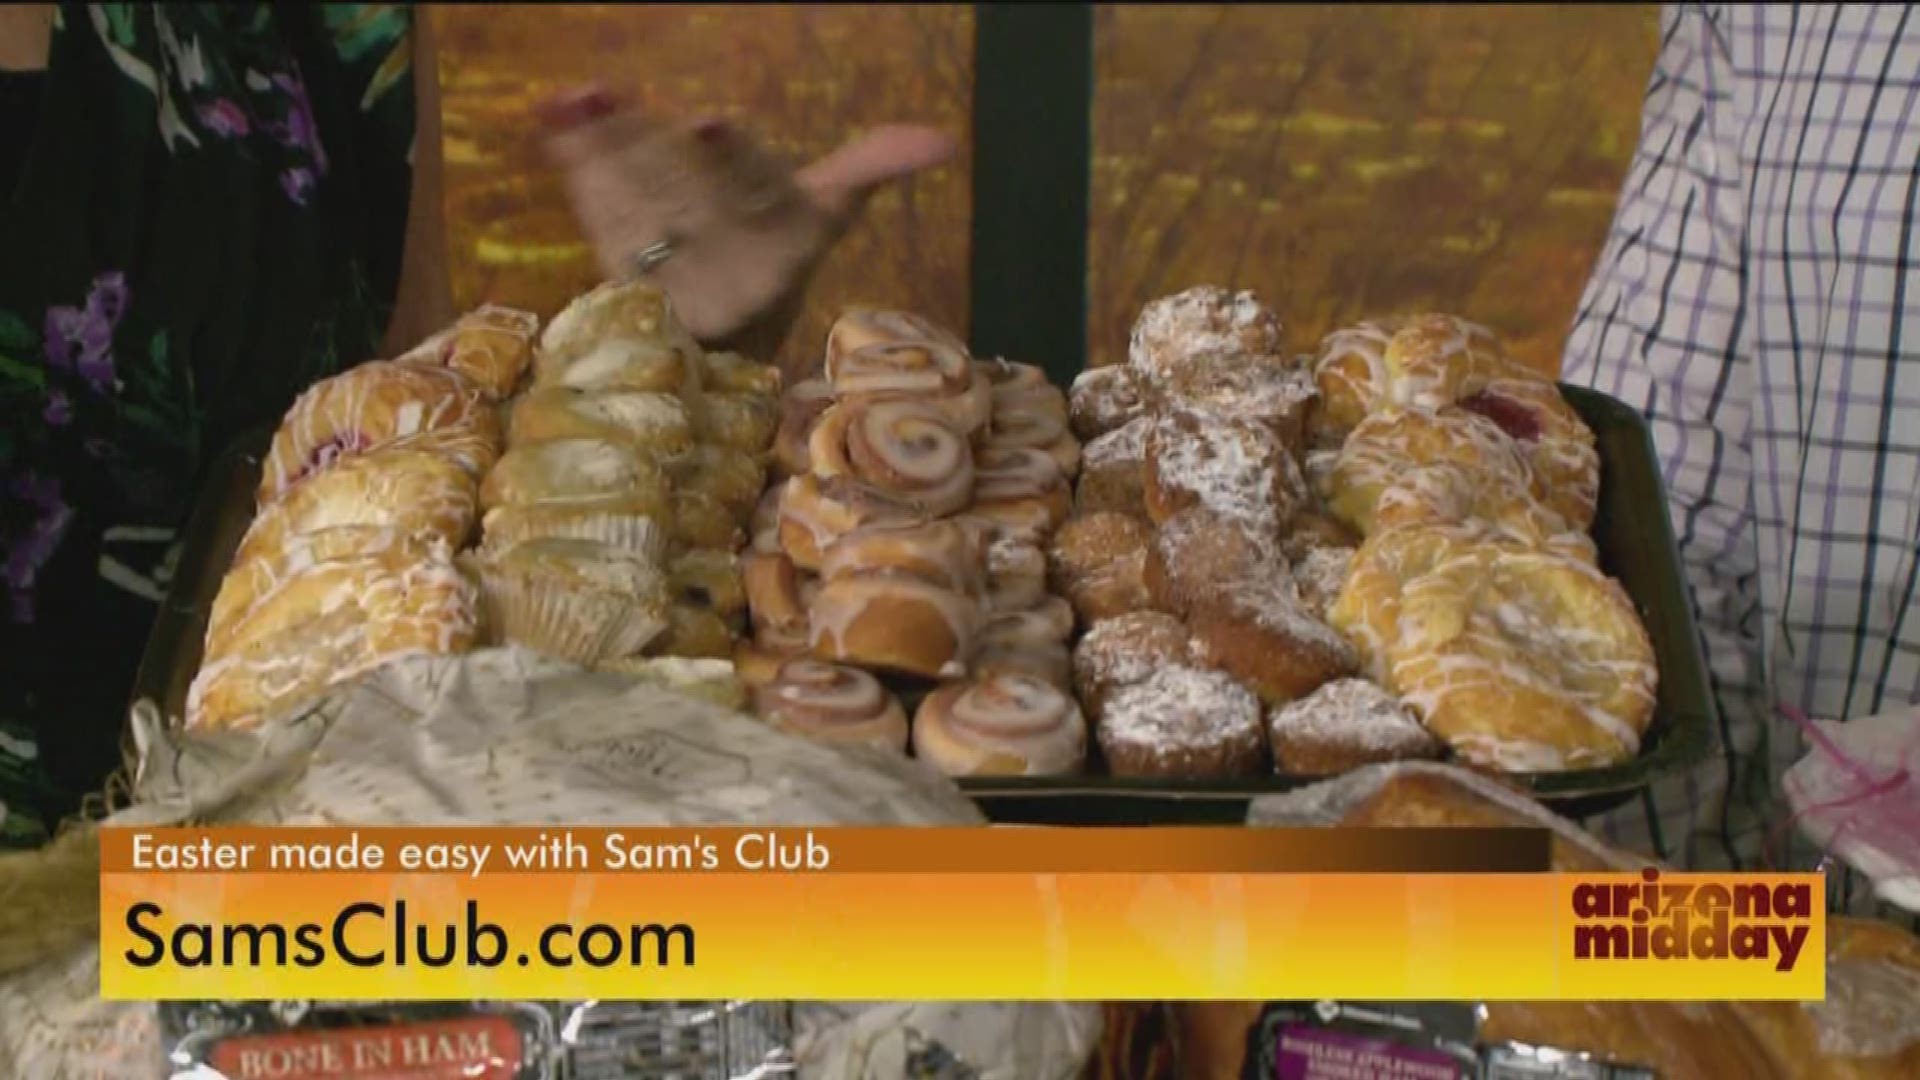 From the food to the baskets, Sam's Club has everything you need to make this Easter memorable. Dewey Shager shows us some of the great products they're offering this season.